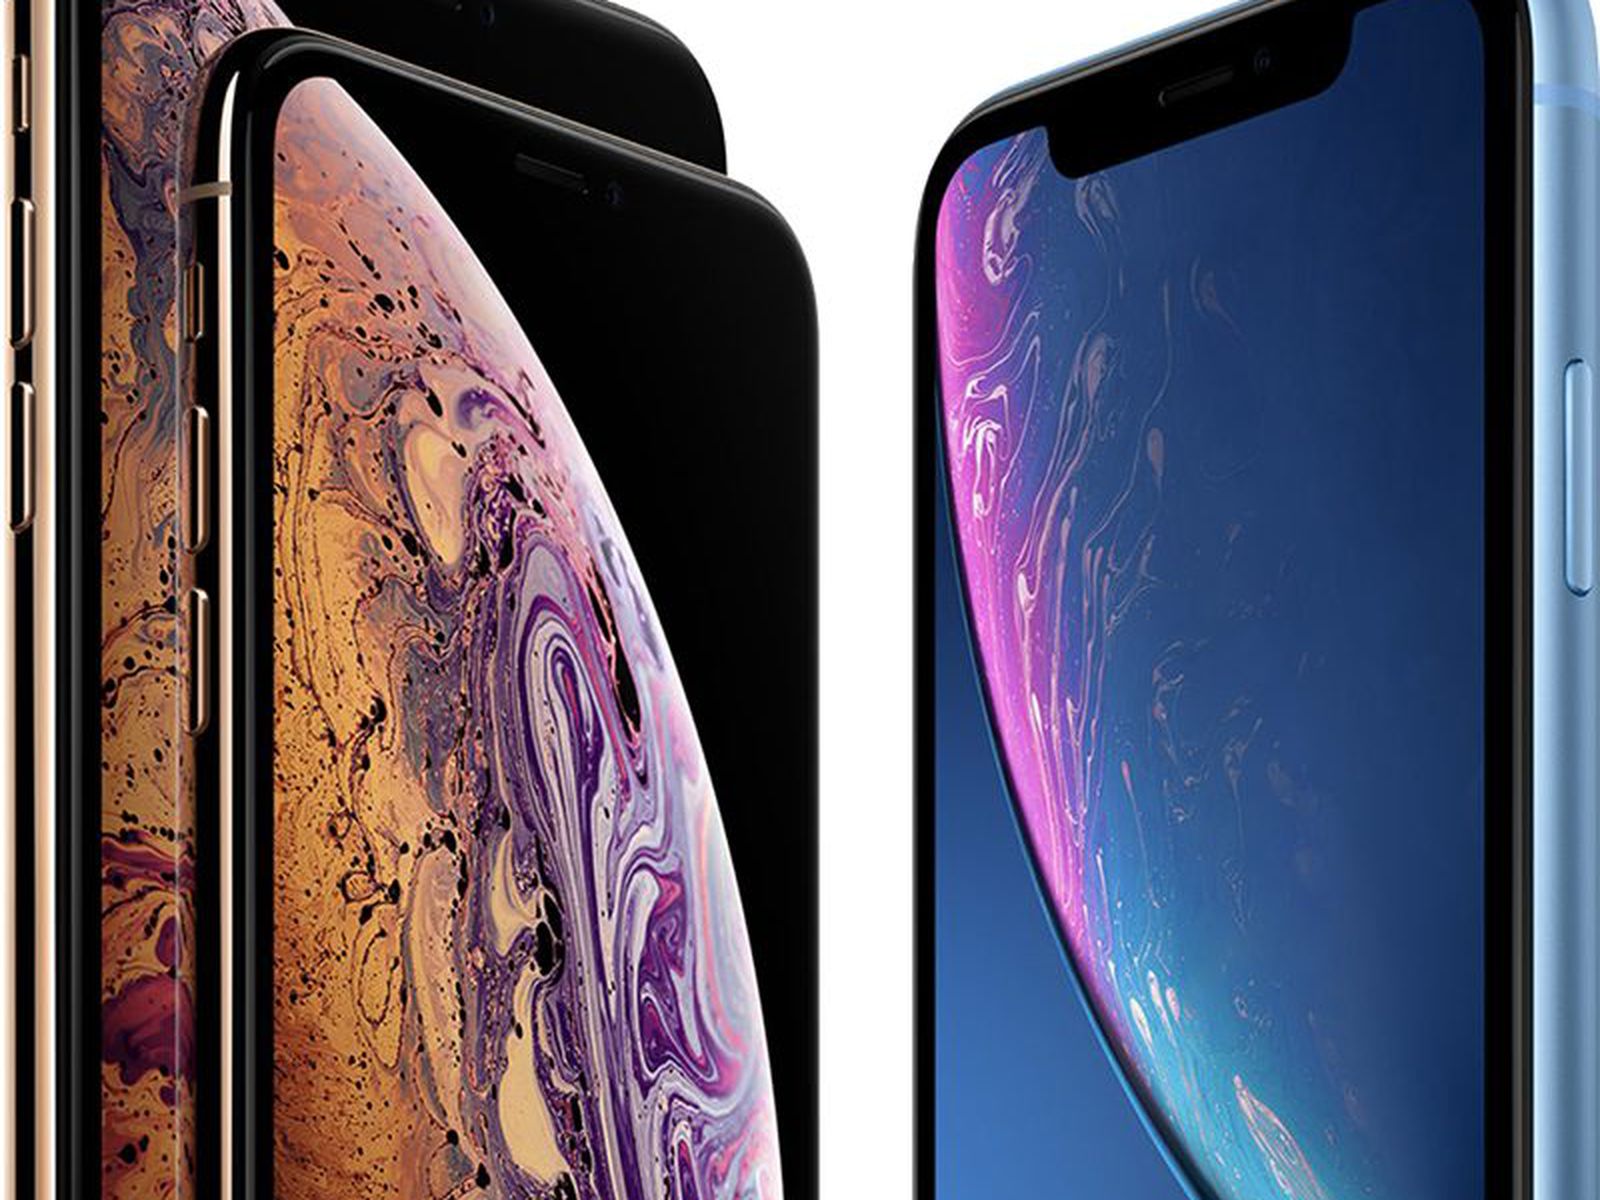 iPhone XS review, updated: A few luxury upgrades over the XR - CNET